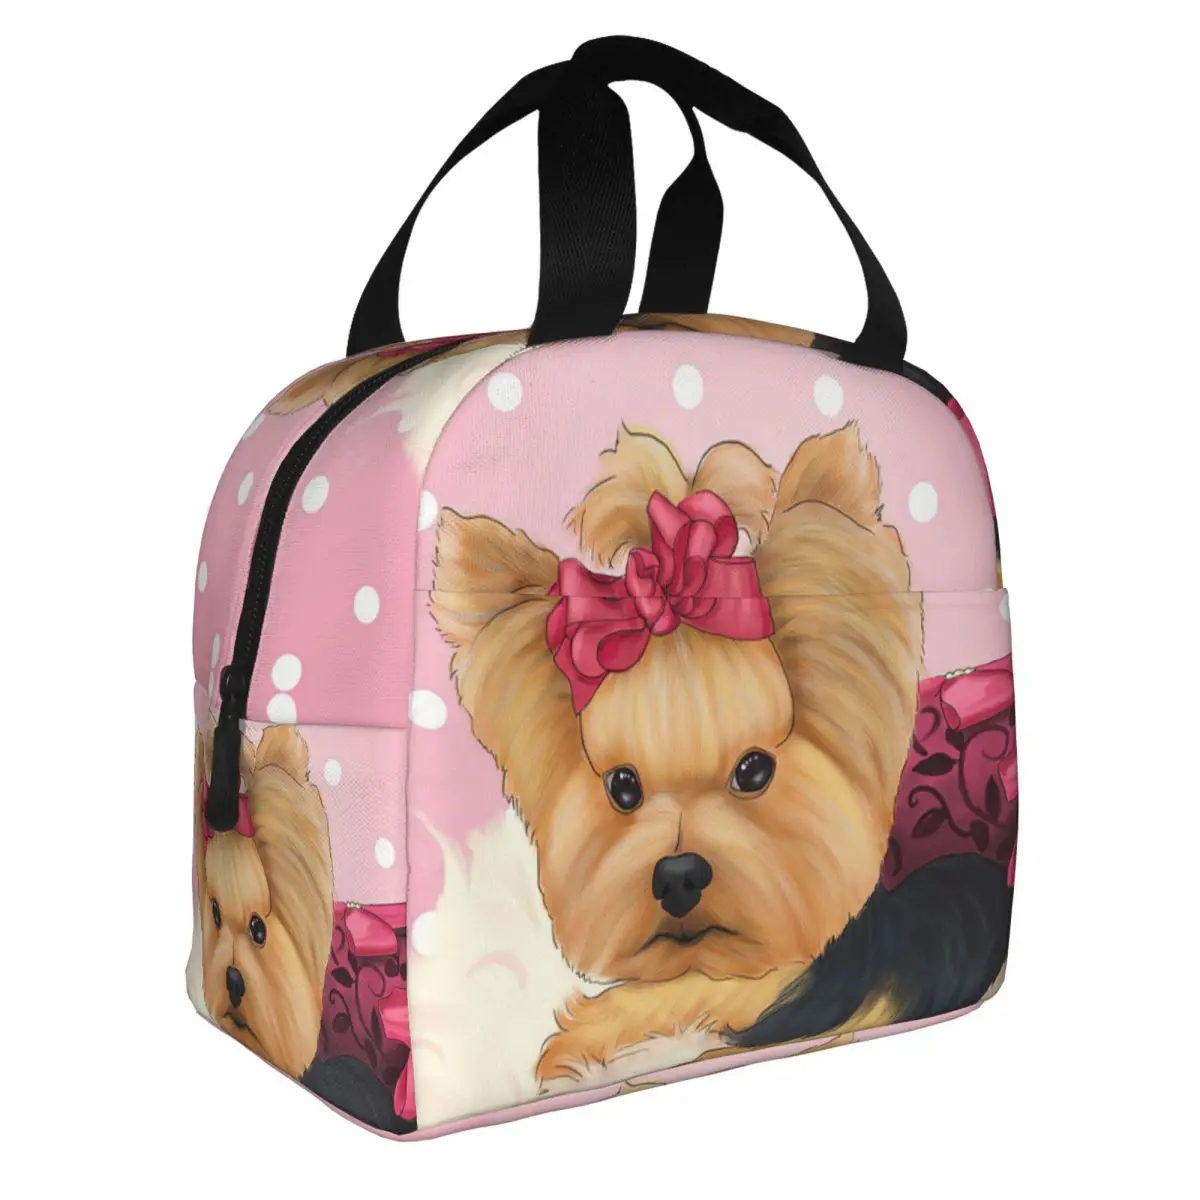 Yorkshire Terrier Dog Lunch Bento Bags Portable Aluminum Foil thickened Thermal Cloth Lunch Bag for Women Men Boy